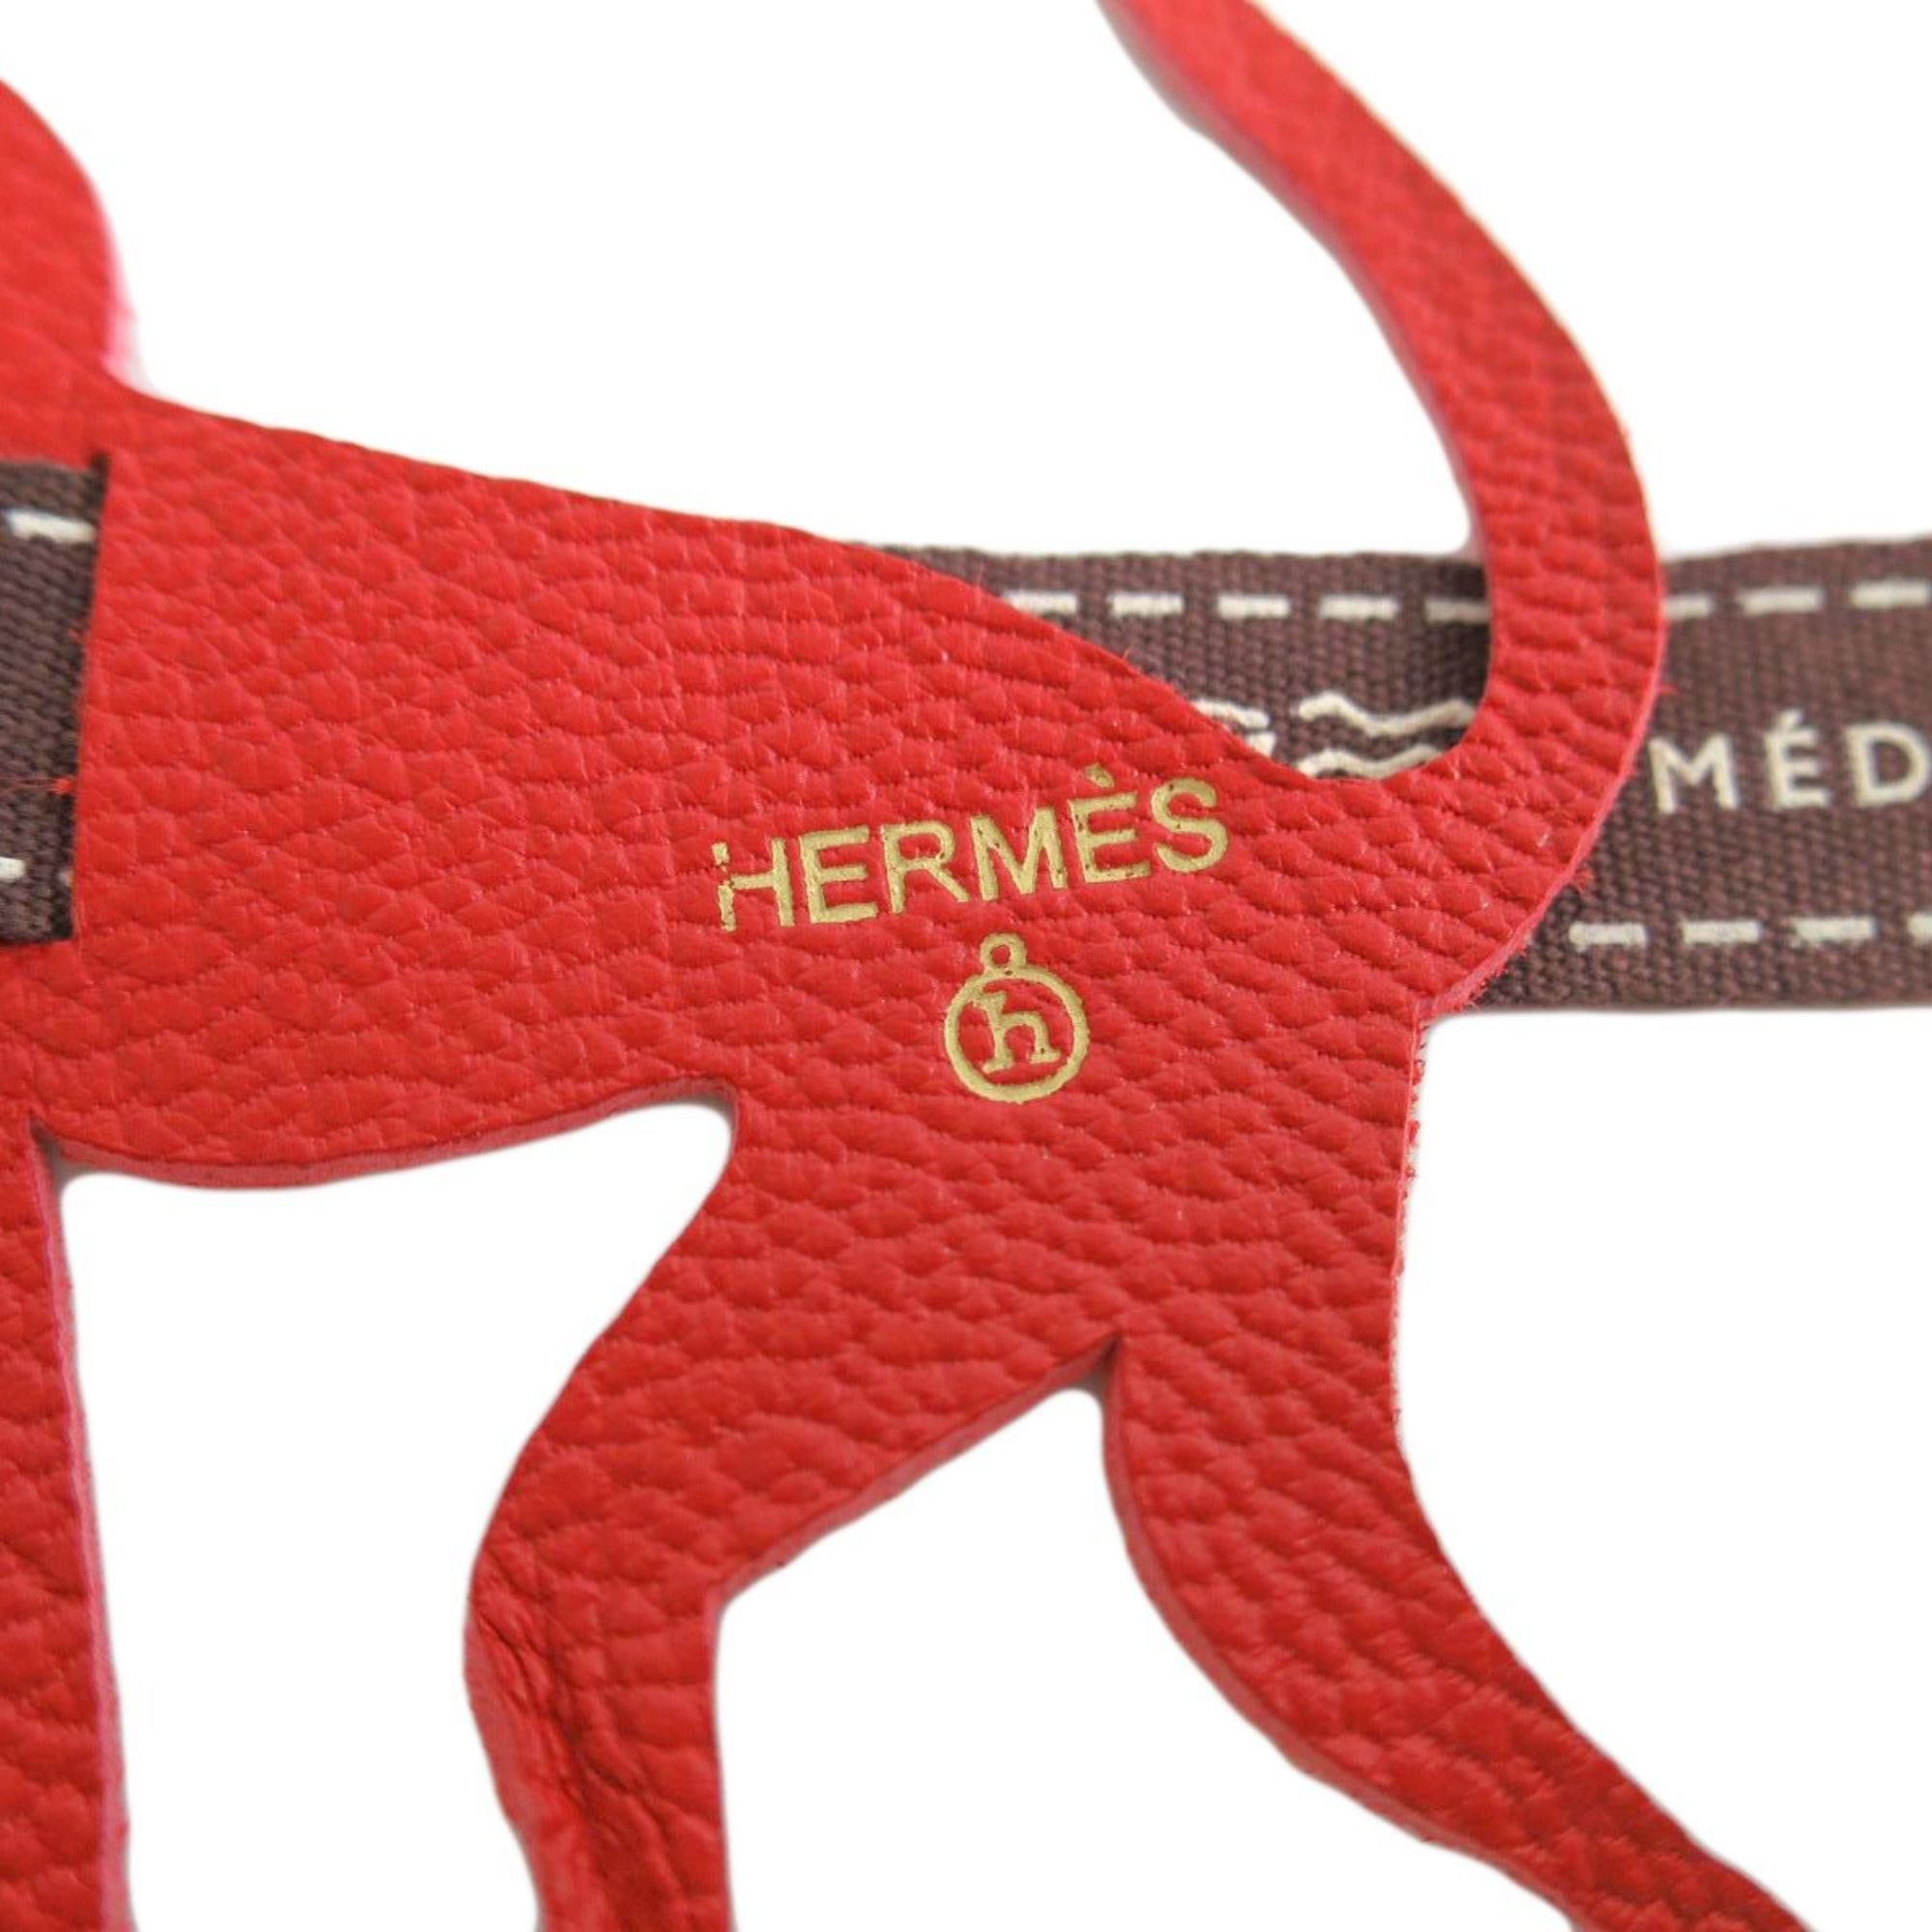 HERMES Petit H Monkey Charm Leather Red